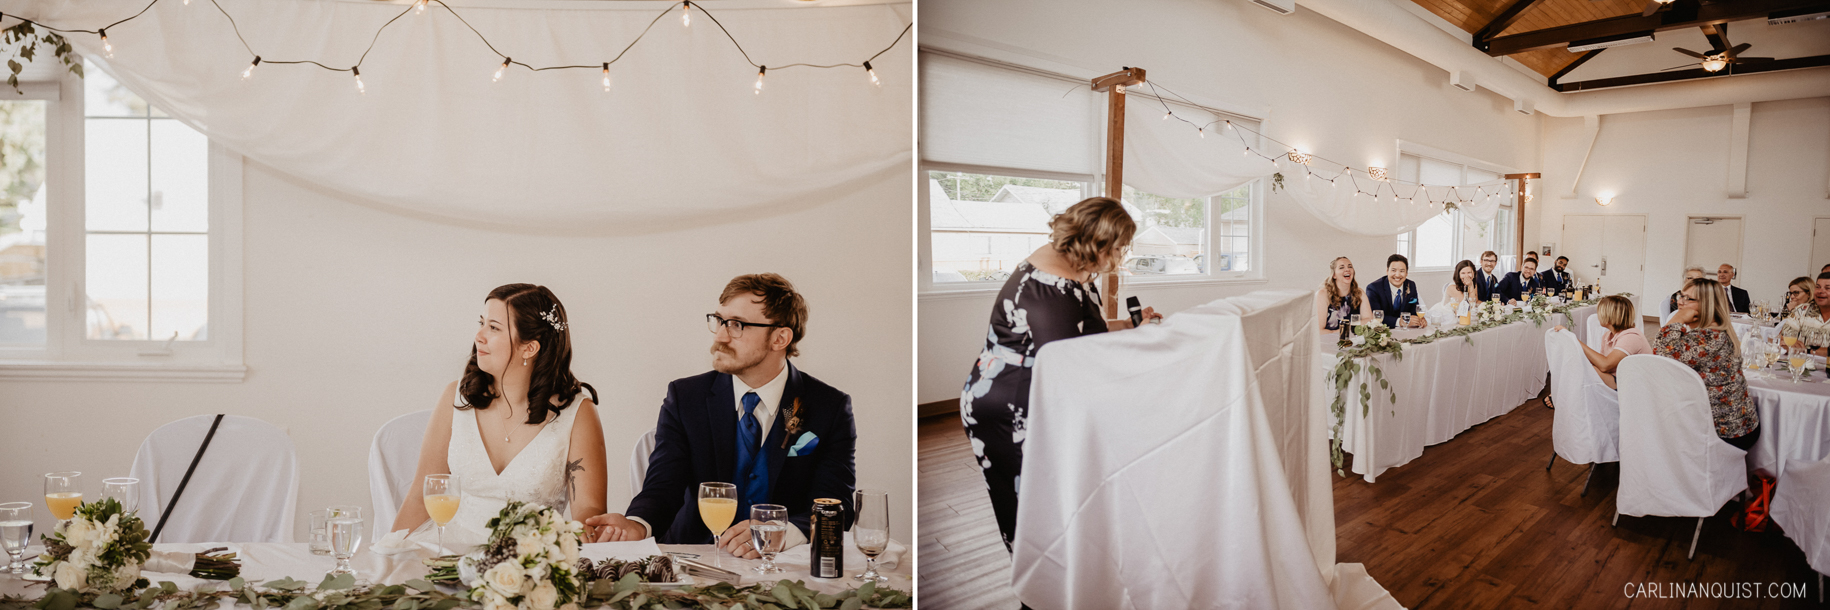 Wedding Speeches | Bowness Scout Hall Wedding